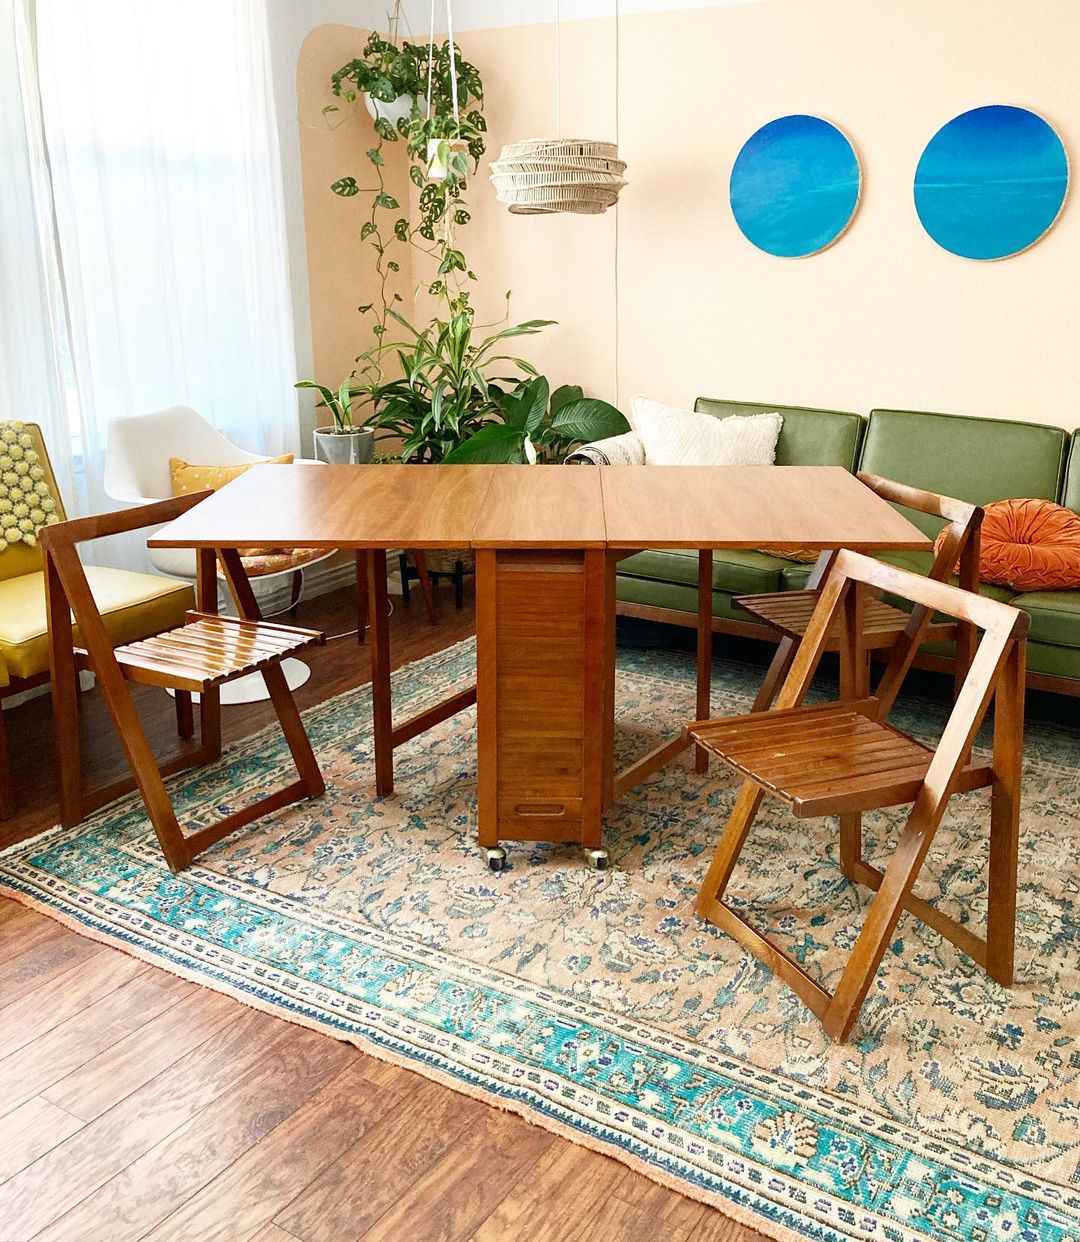 Teak folding table and chairs set in a bright living space. Photo by Instagram user @recycled.restored.